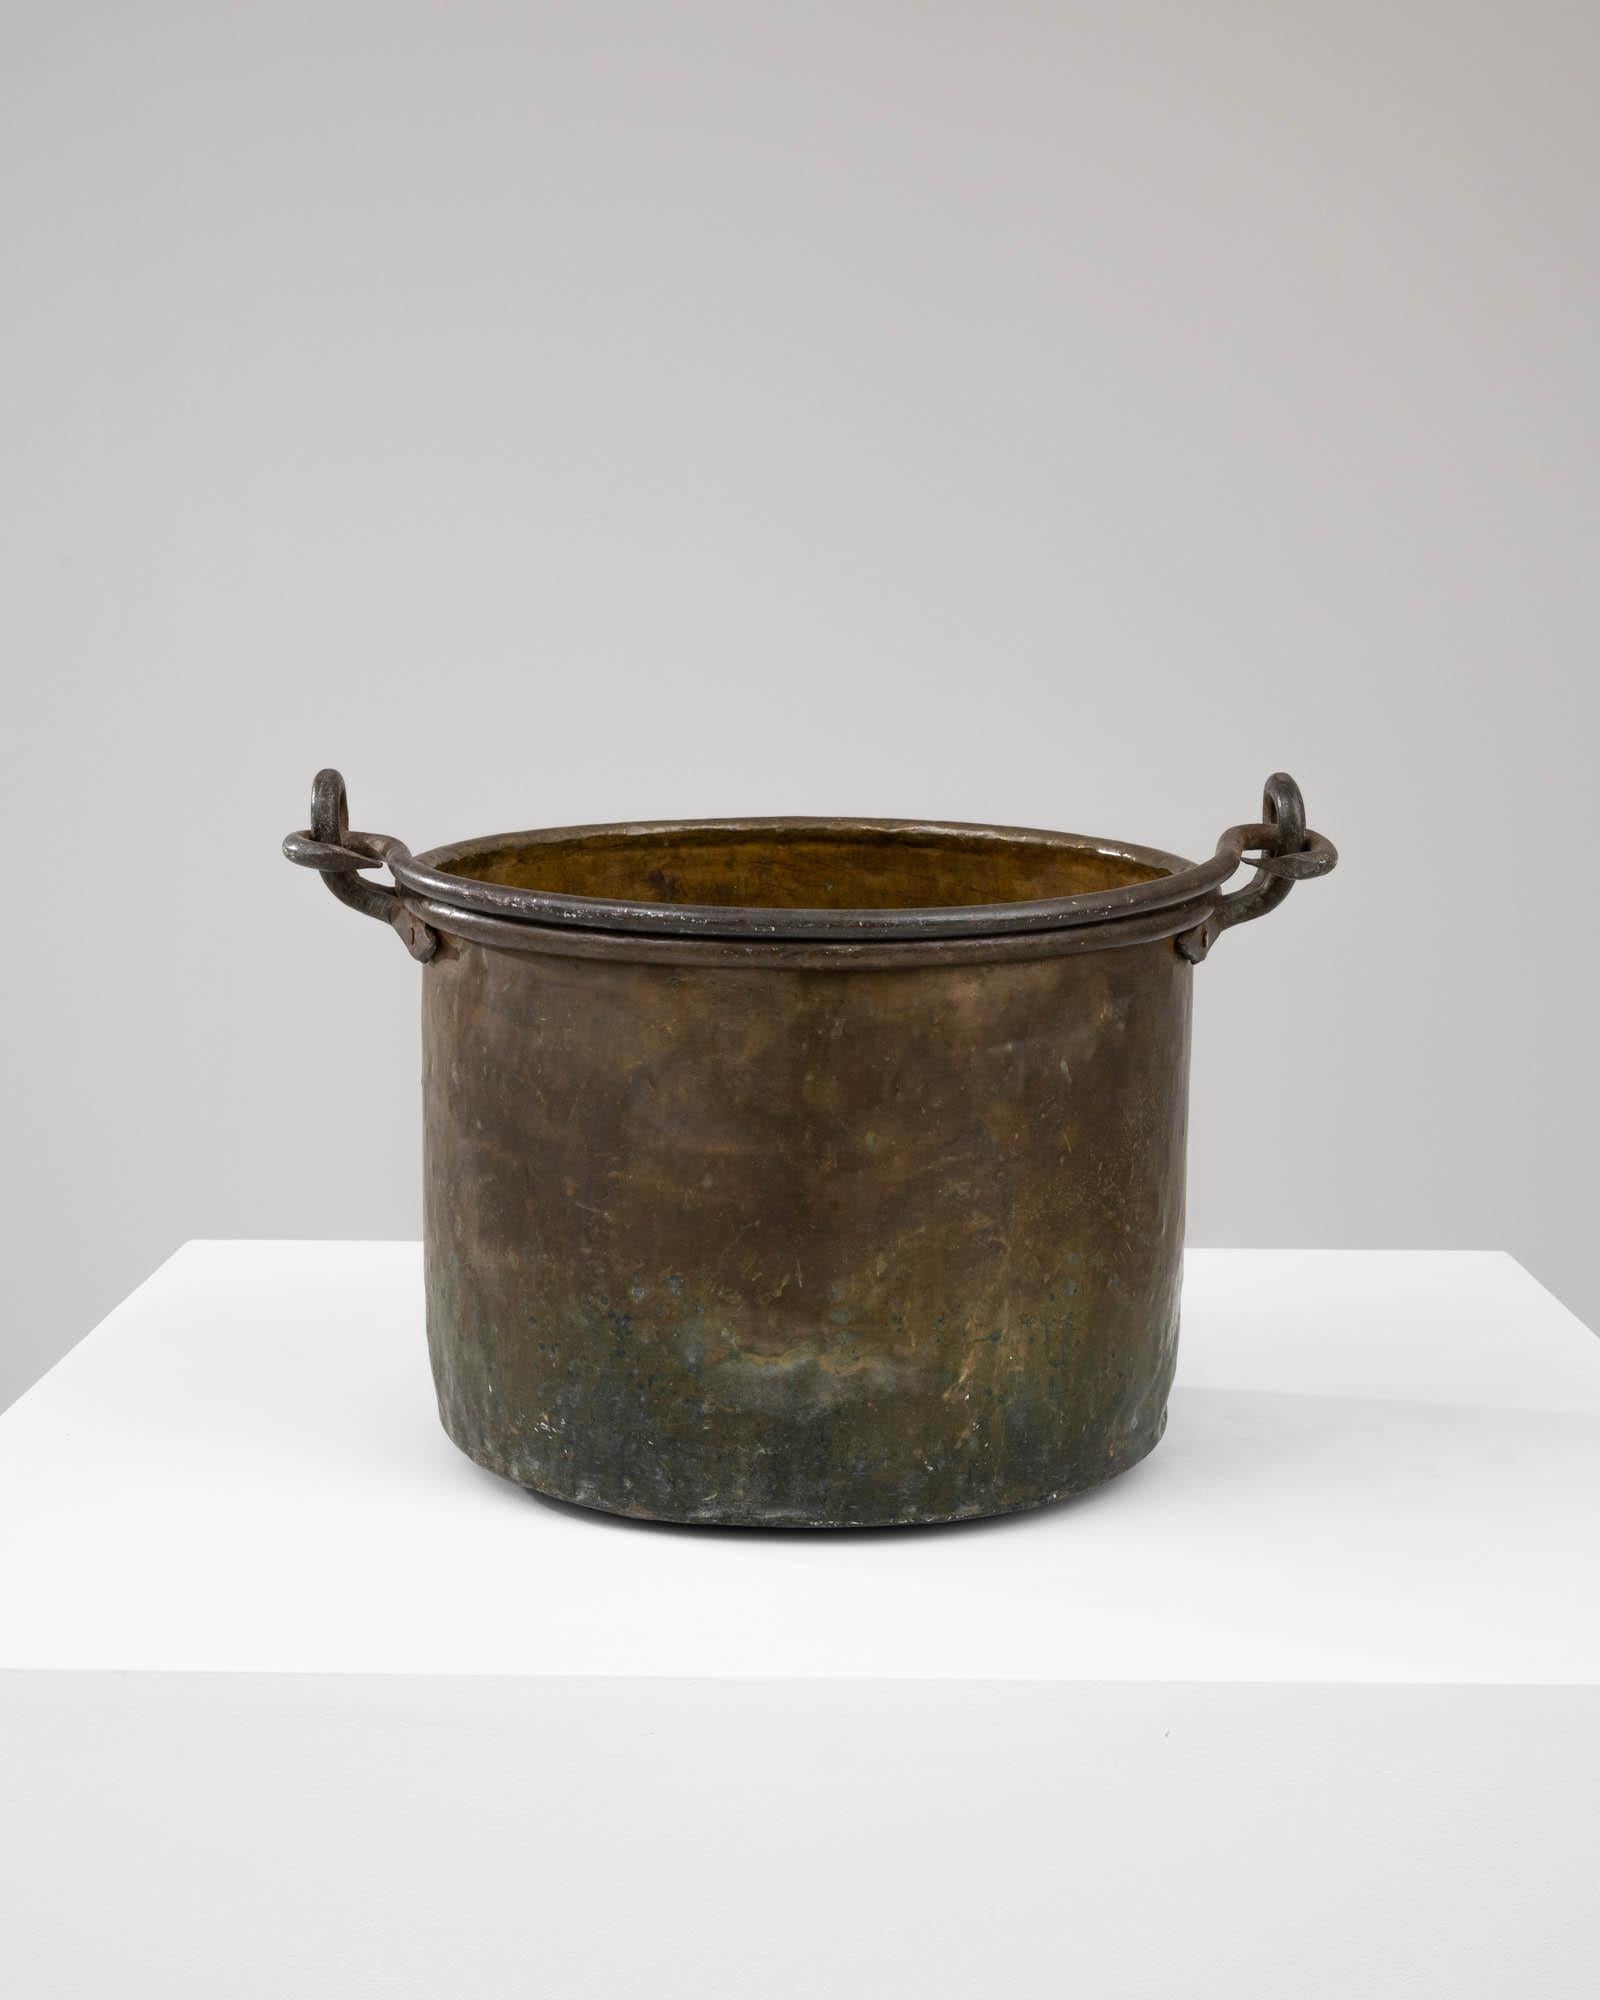 This French Brass Bucket from the early 19th century is steeped in historical value, having served countless purposes over many decades. The iron handle, exhibiting an elegantly simple twist at its apex, is a functional design element that adds a